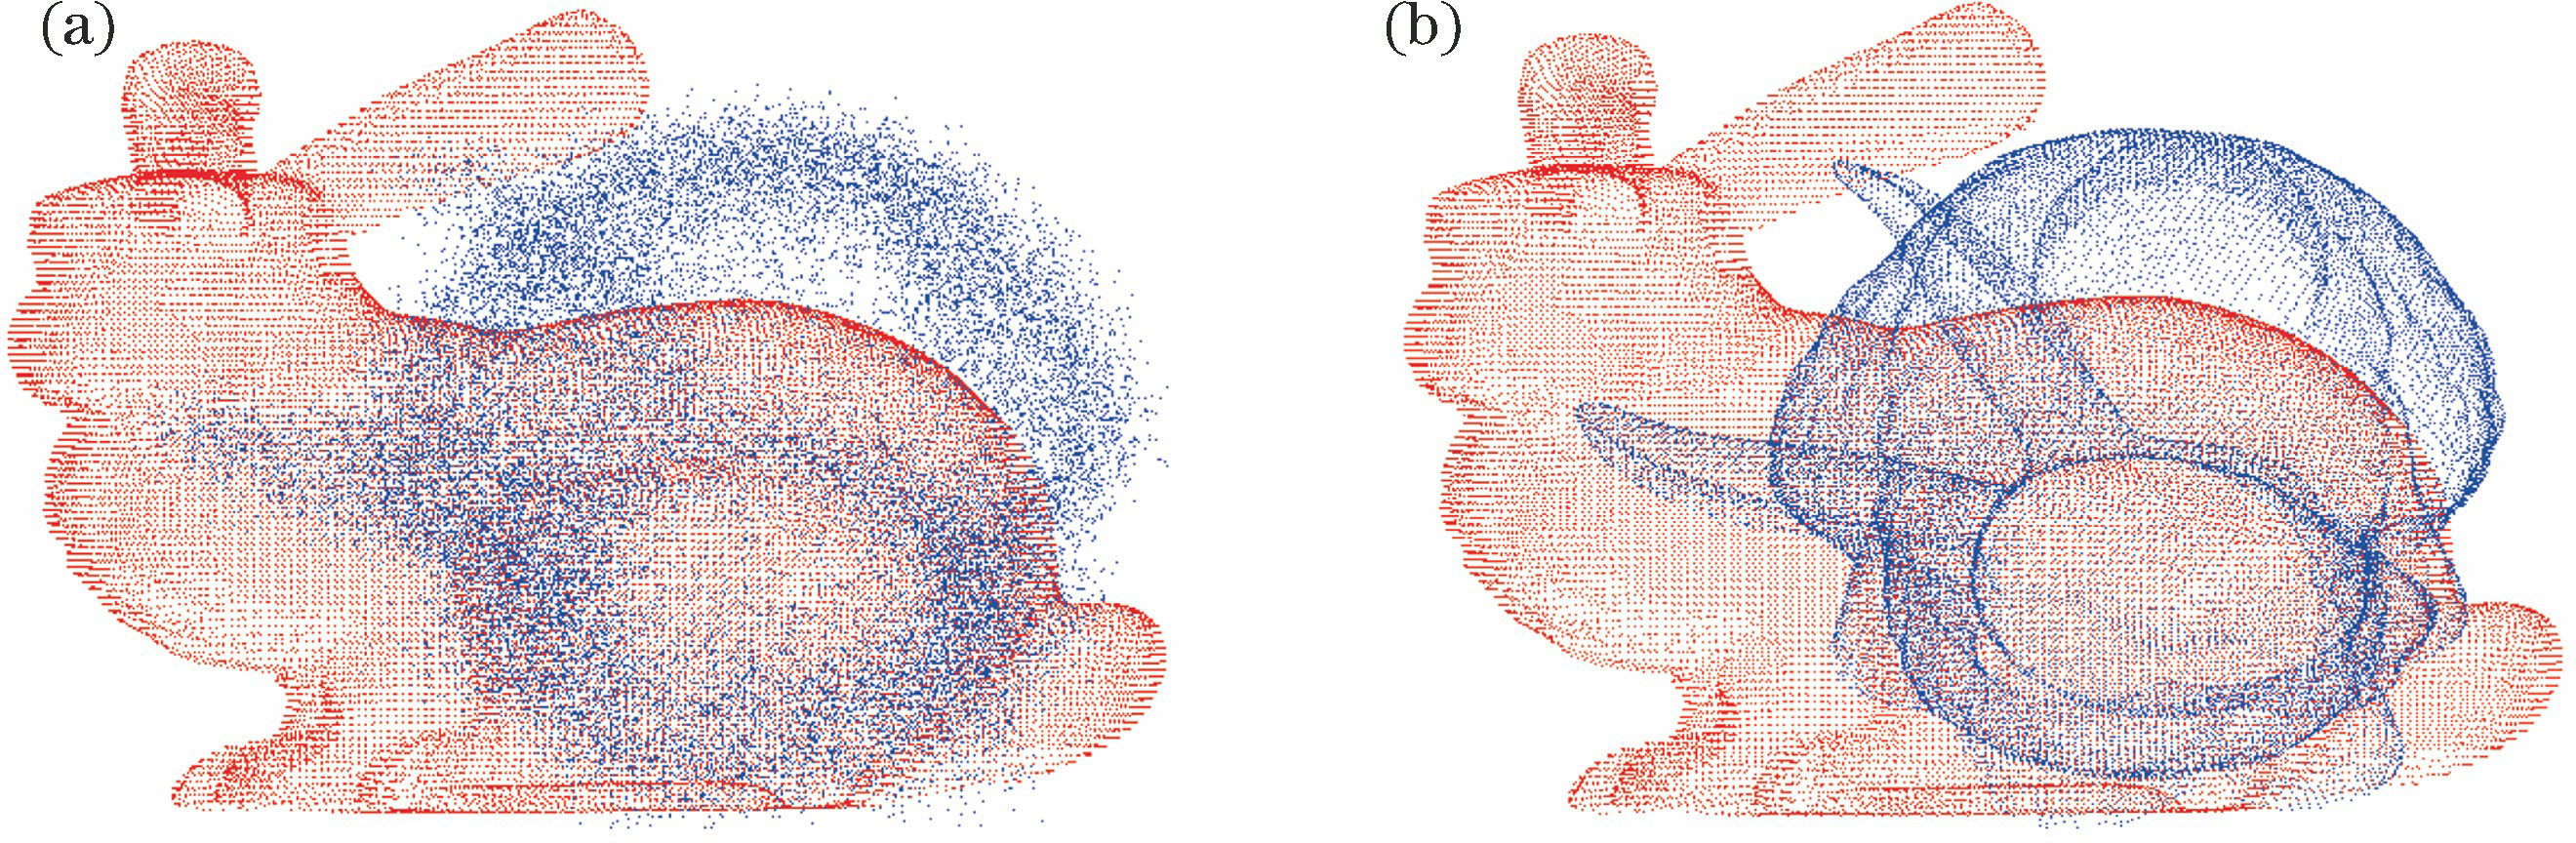 Initial state of point cloud for Bunny. (a) With white Gaussian noise; (b) without white Gaussian noise